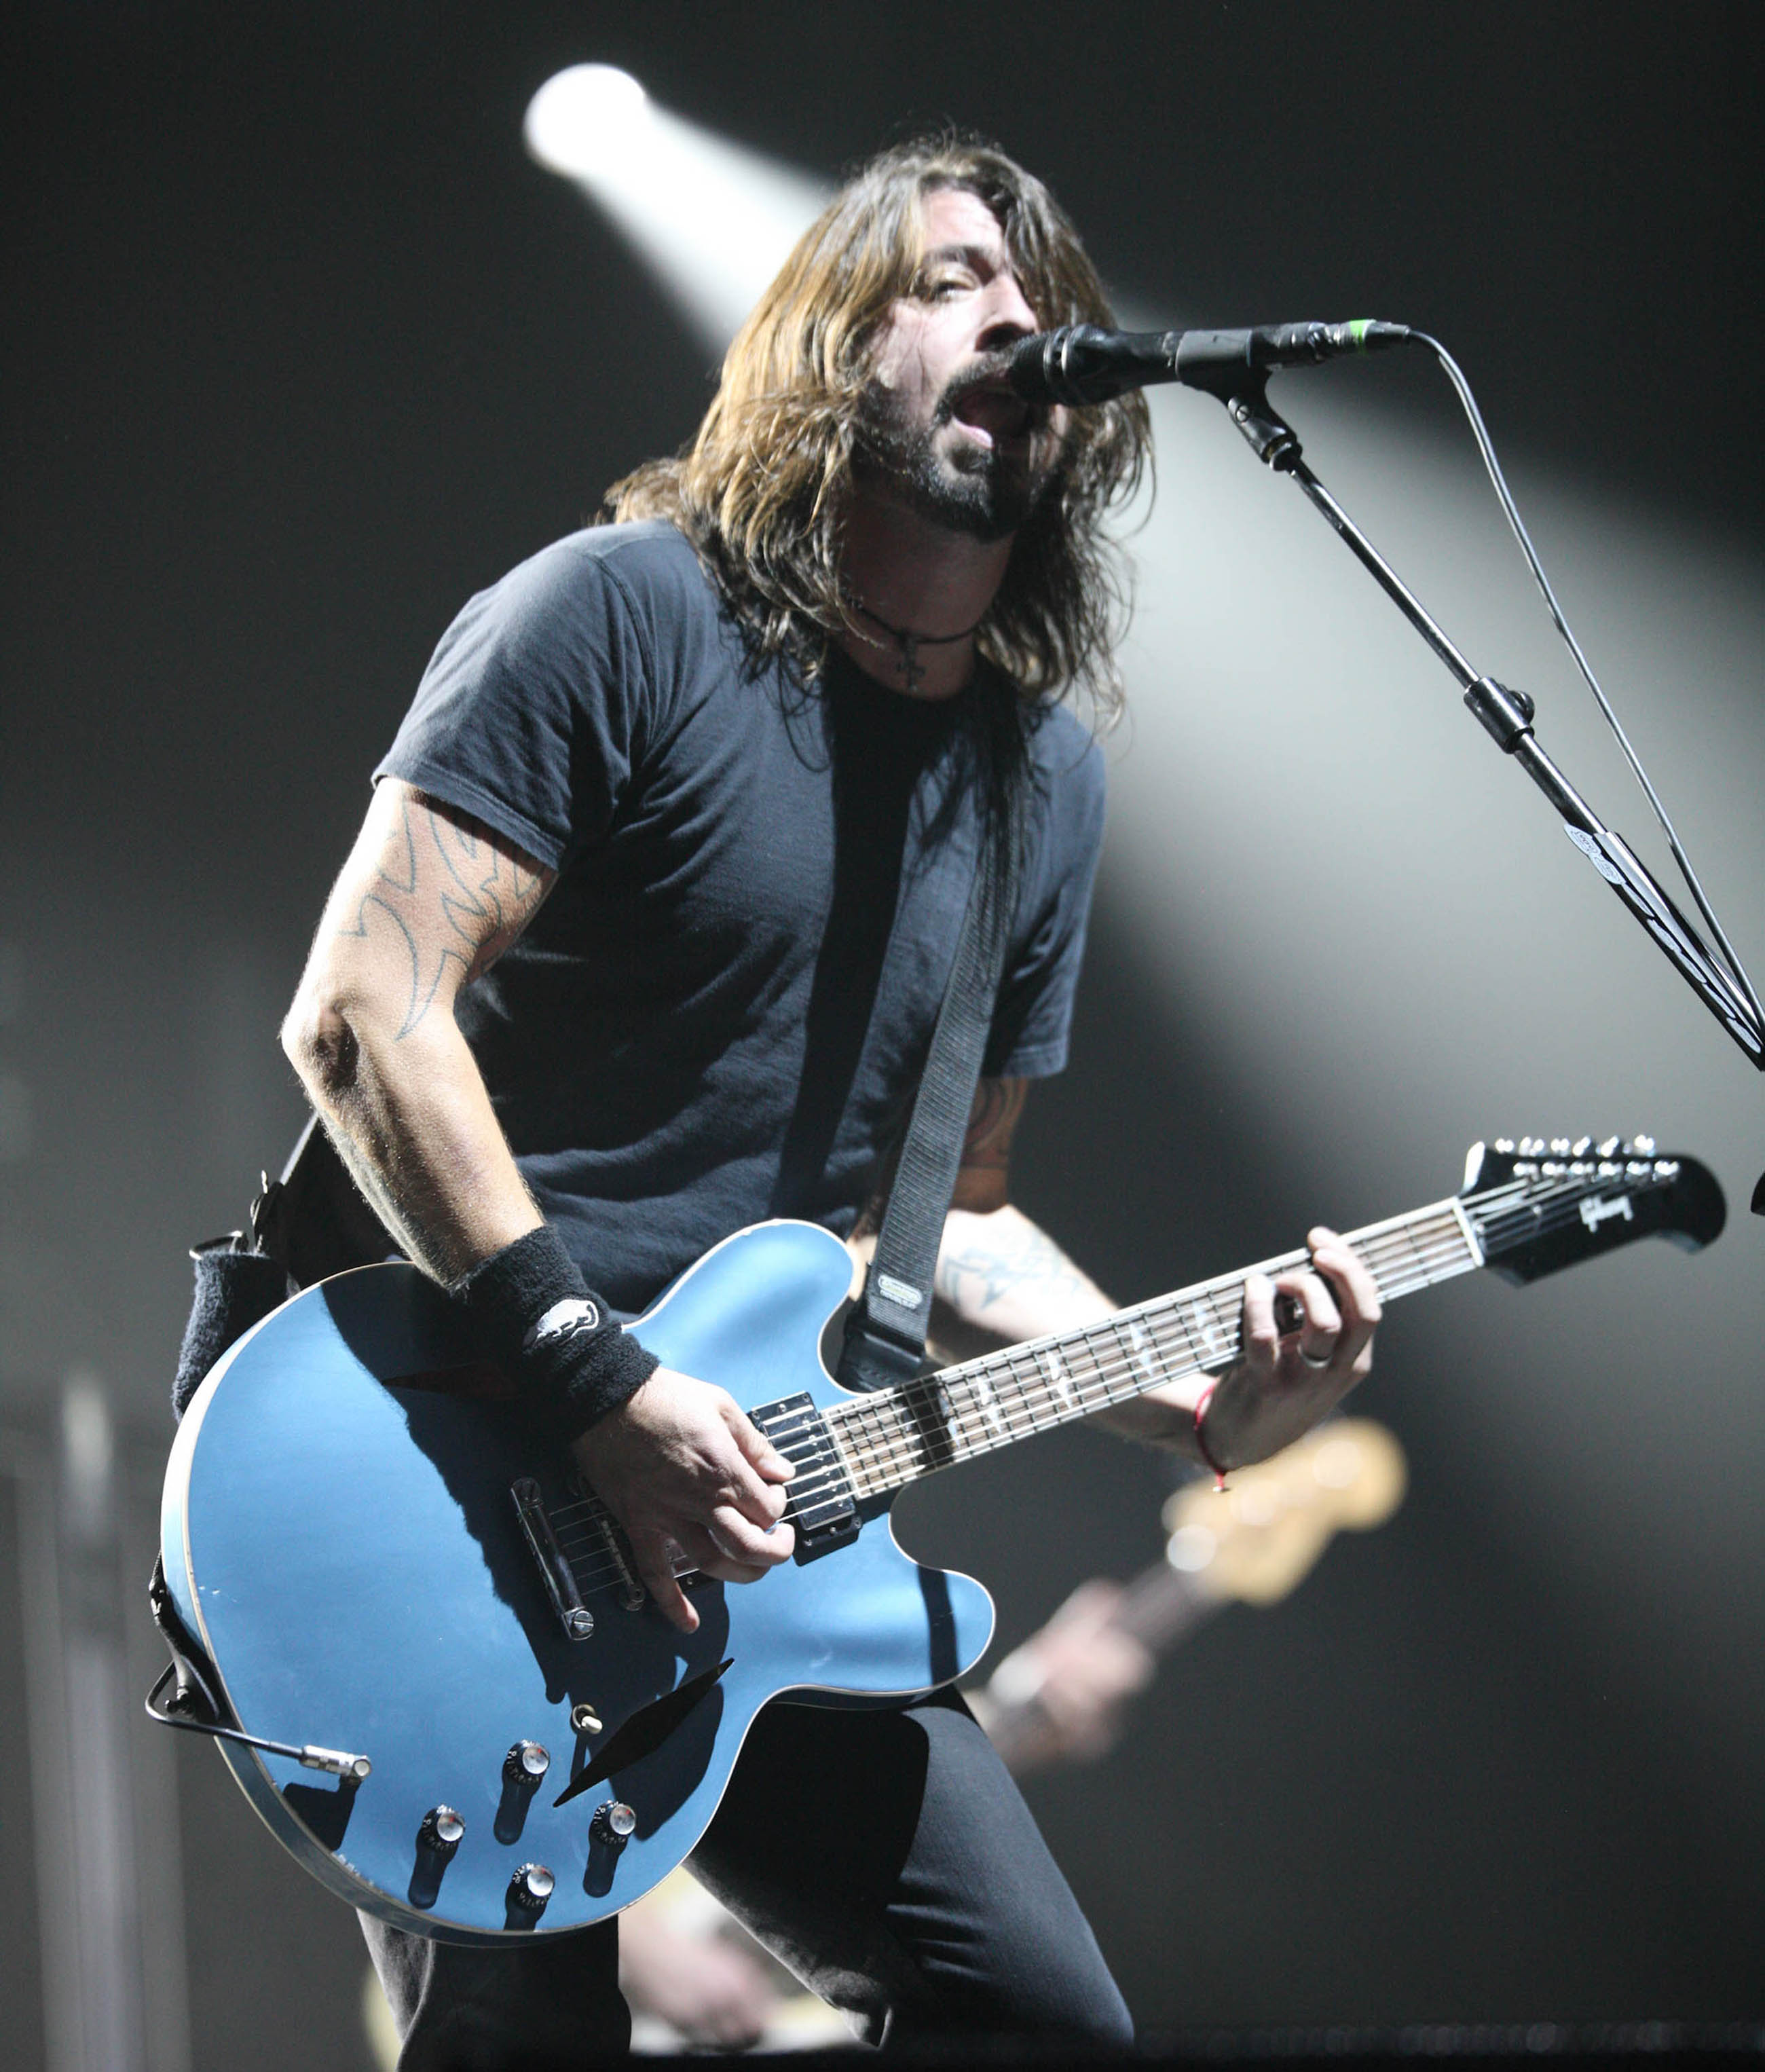 Spelning, Rockband, Rock, Band, Dave Grohl, Musik, Foo Fighters